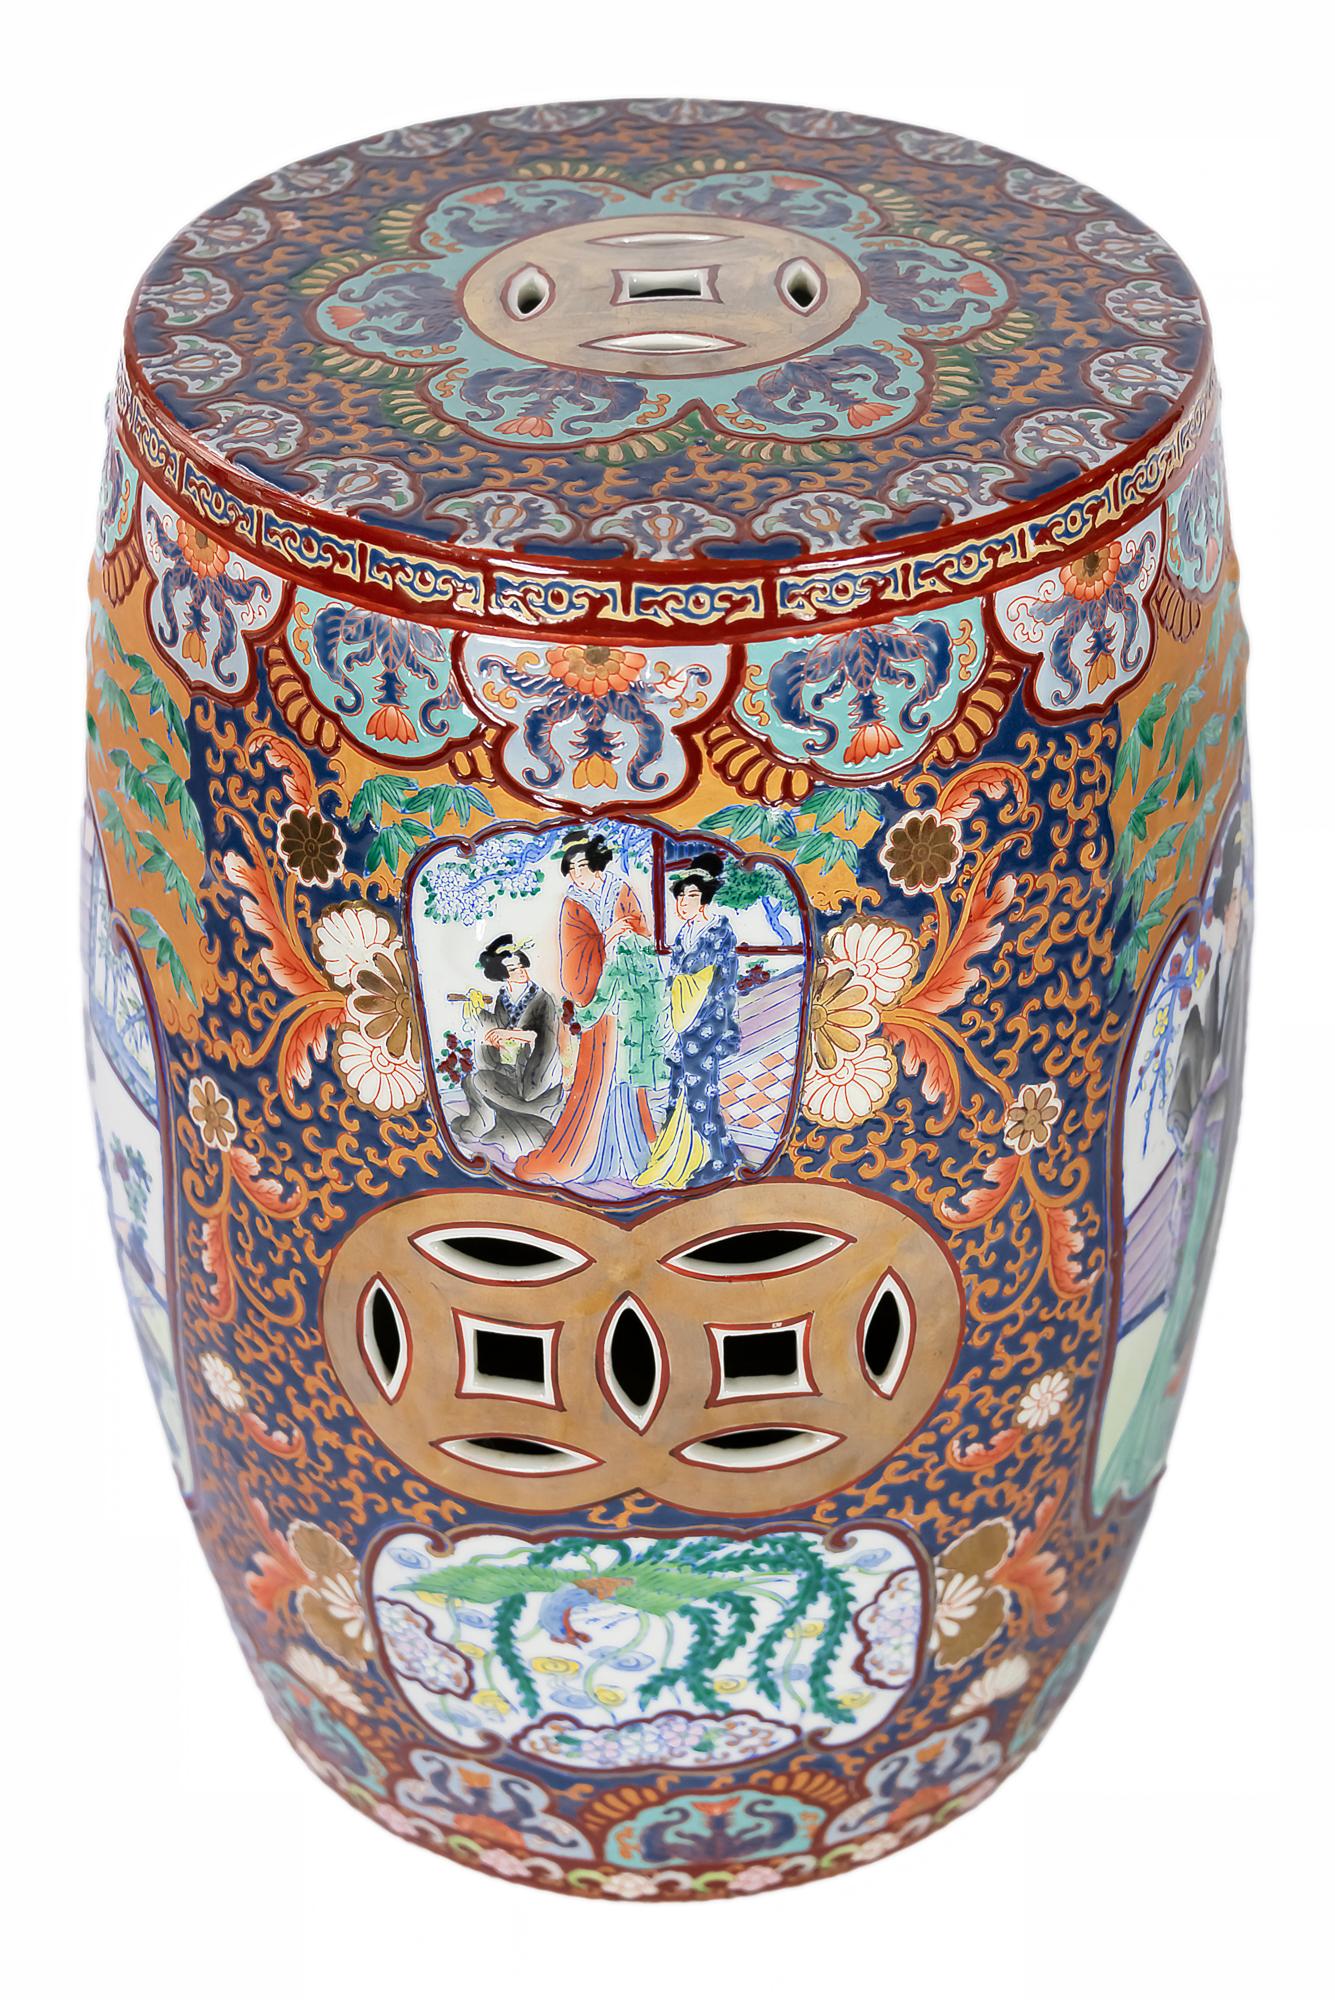 Chinese ceramic garden stool with openwork details and circumferential decoration of the floral elements and scenes of ladies.

